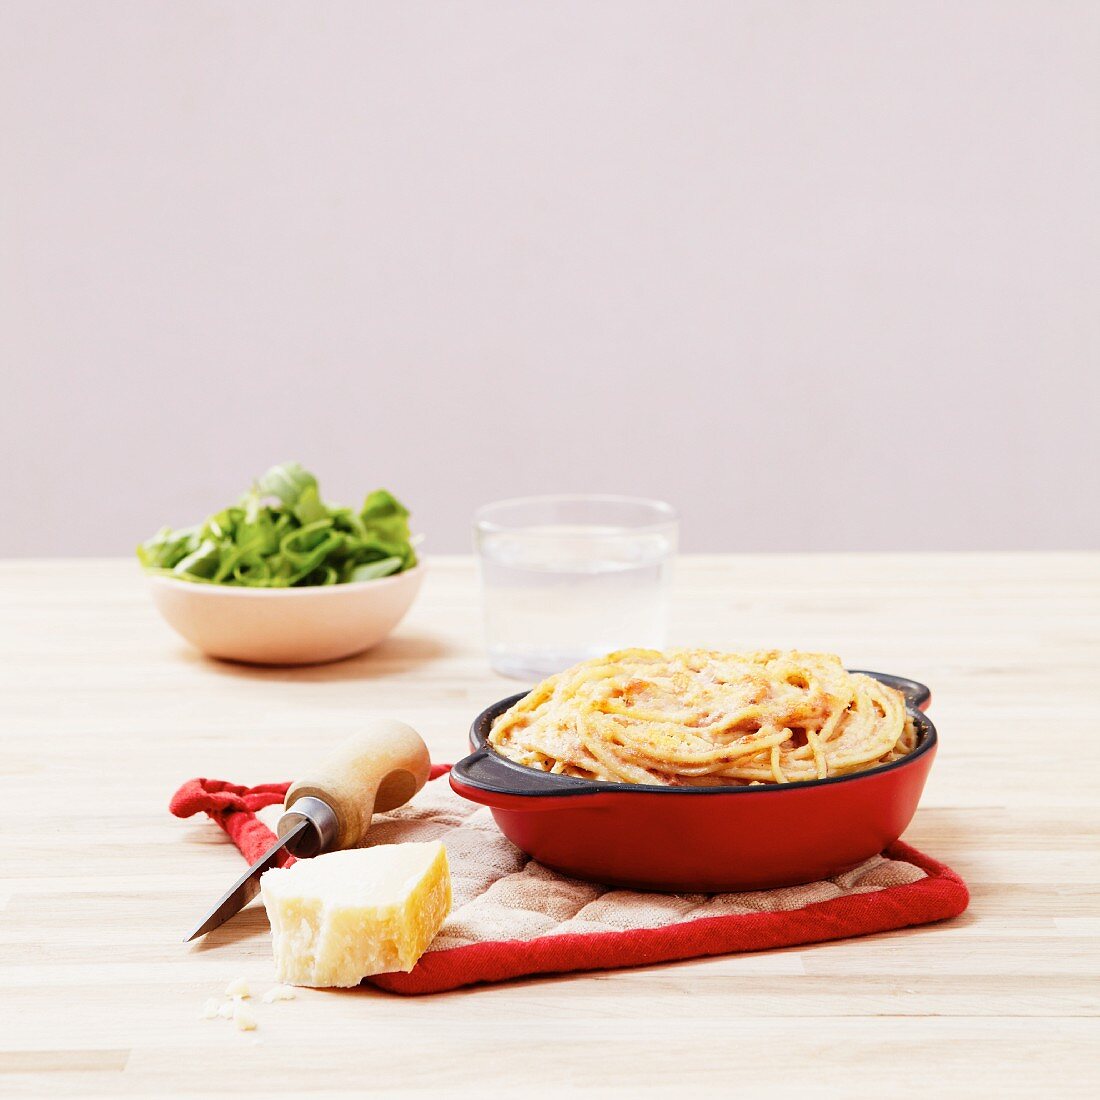 Spaghetti bake with goose liver and parmesan